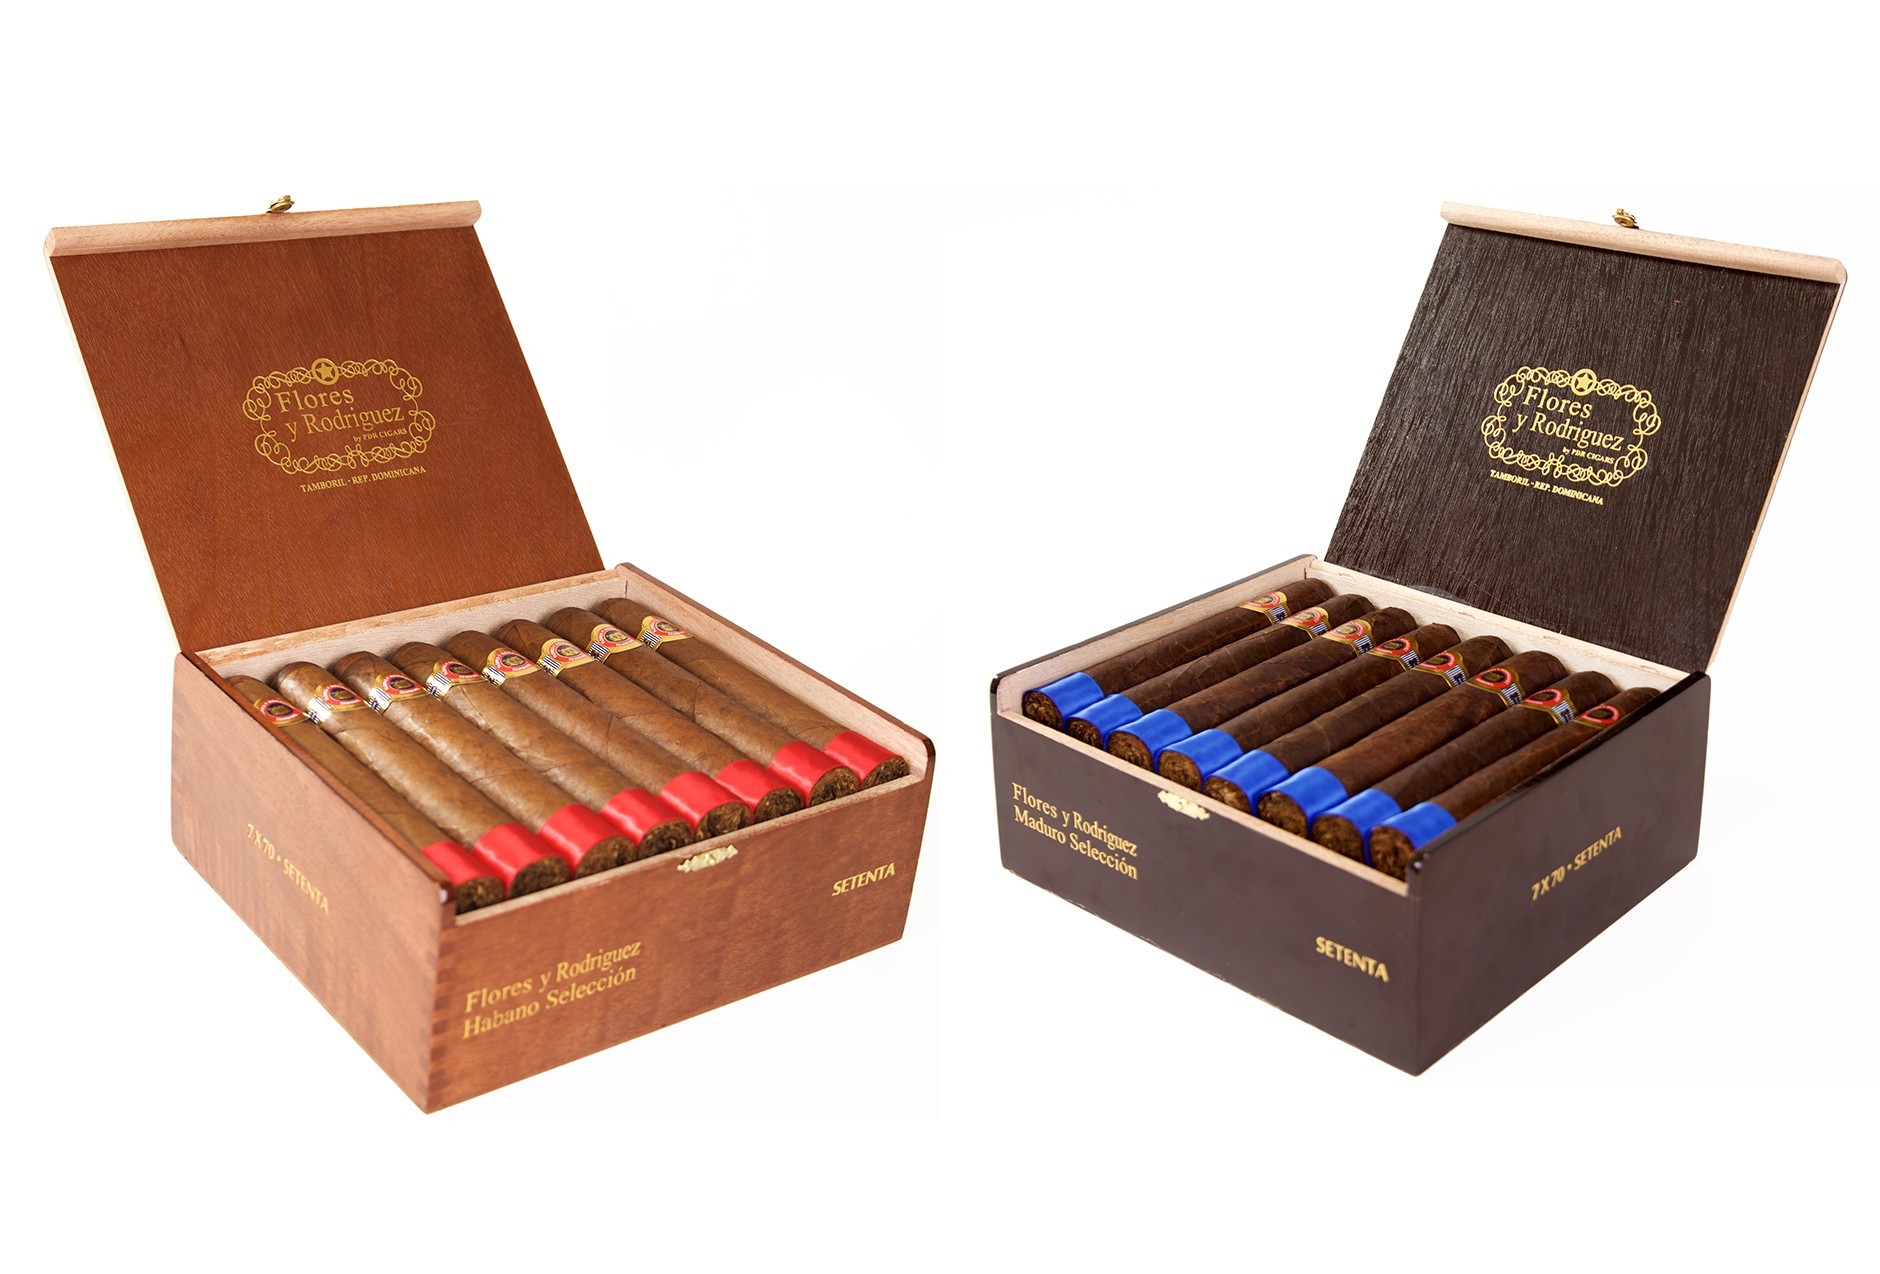 PDR Cigars Flores y Rodriguez Reserva Feb 2016 feature